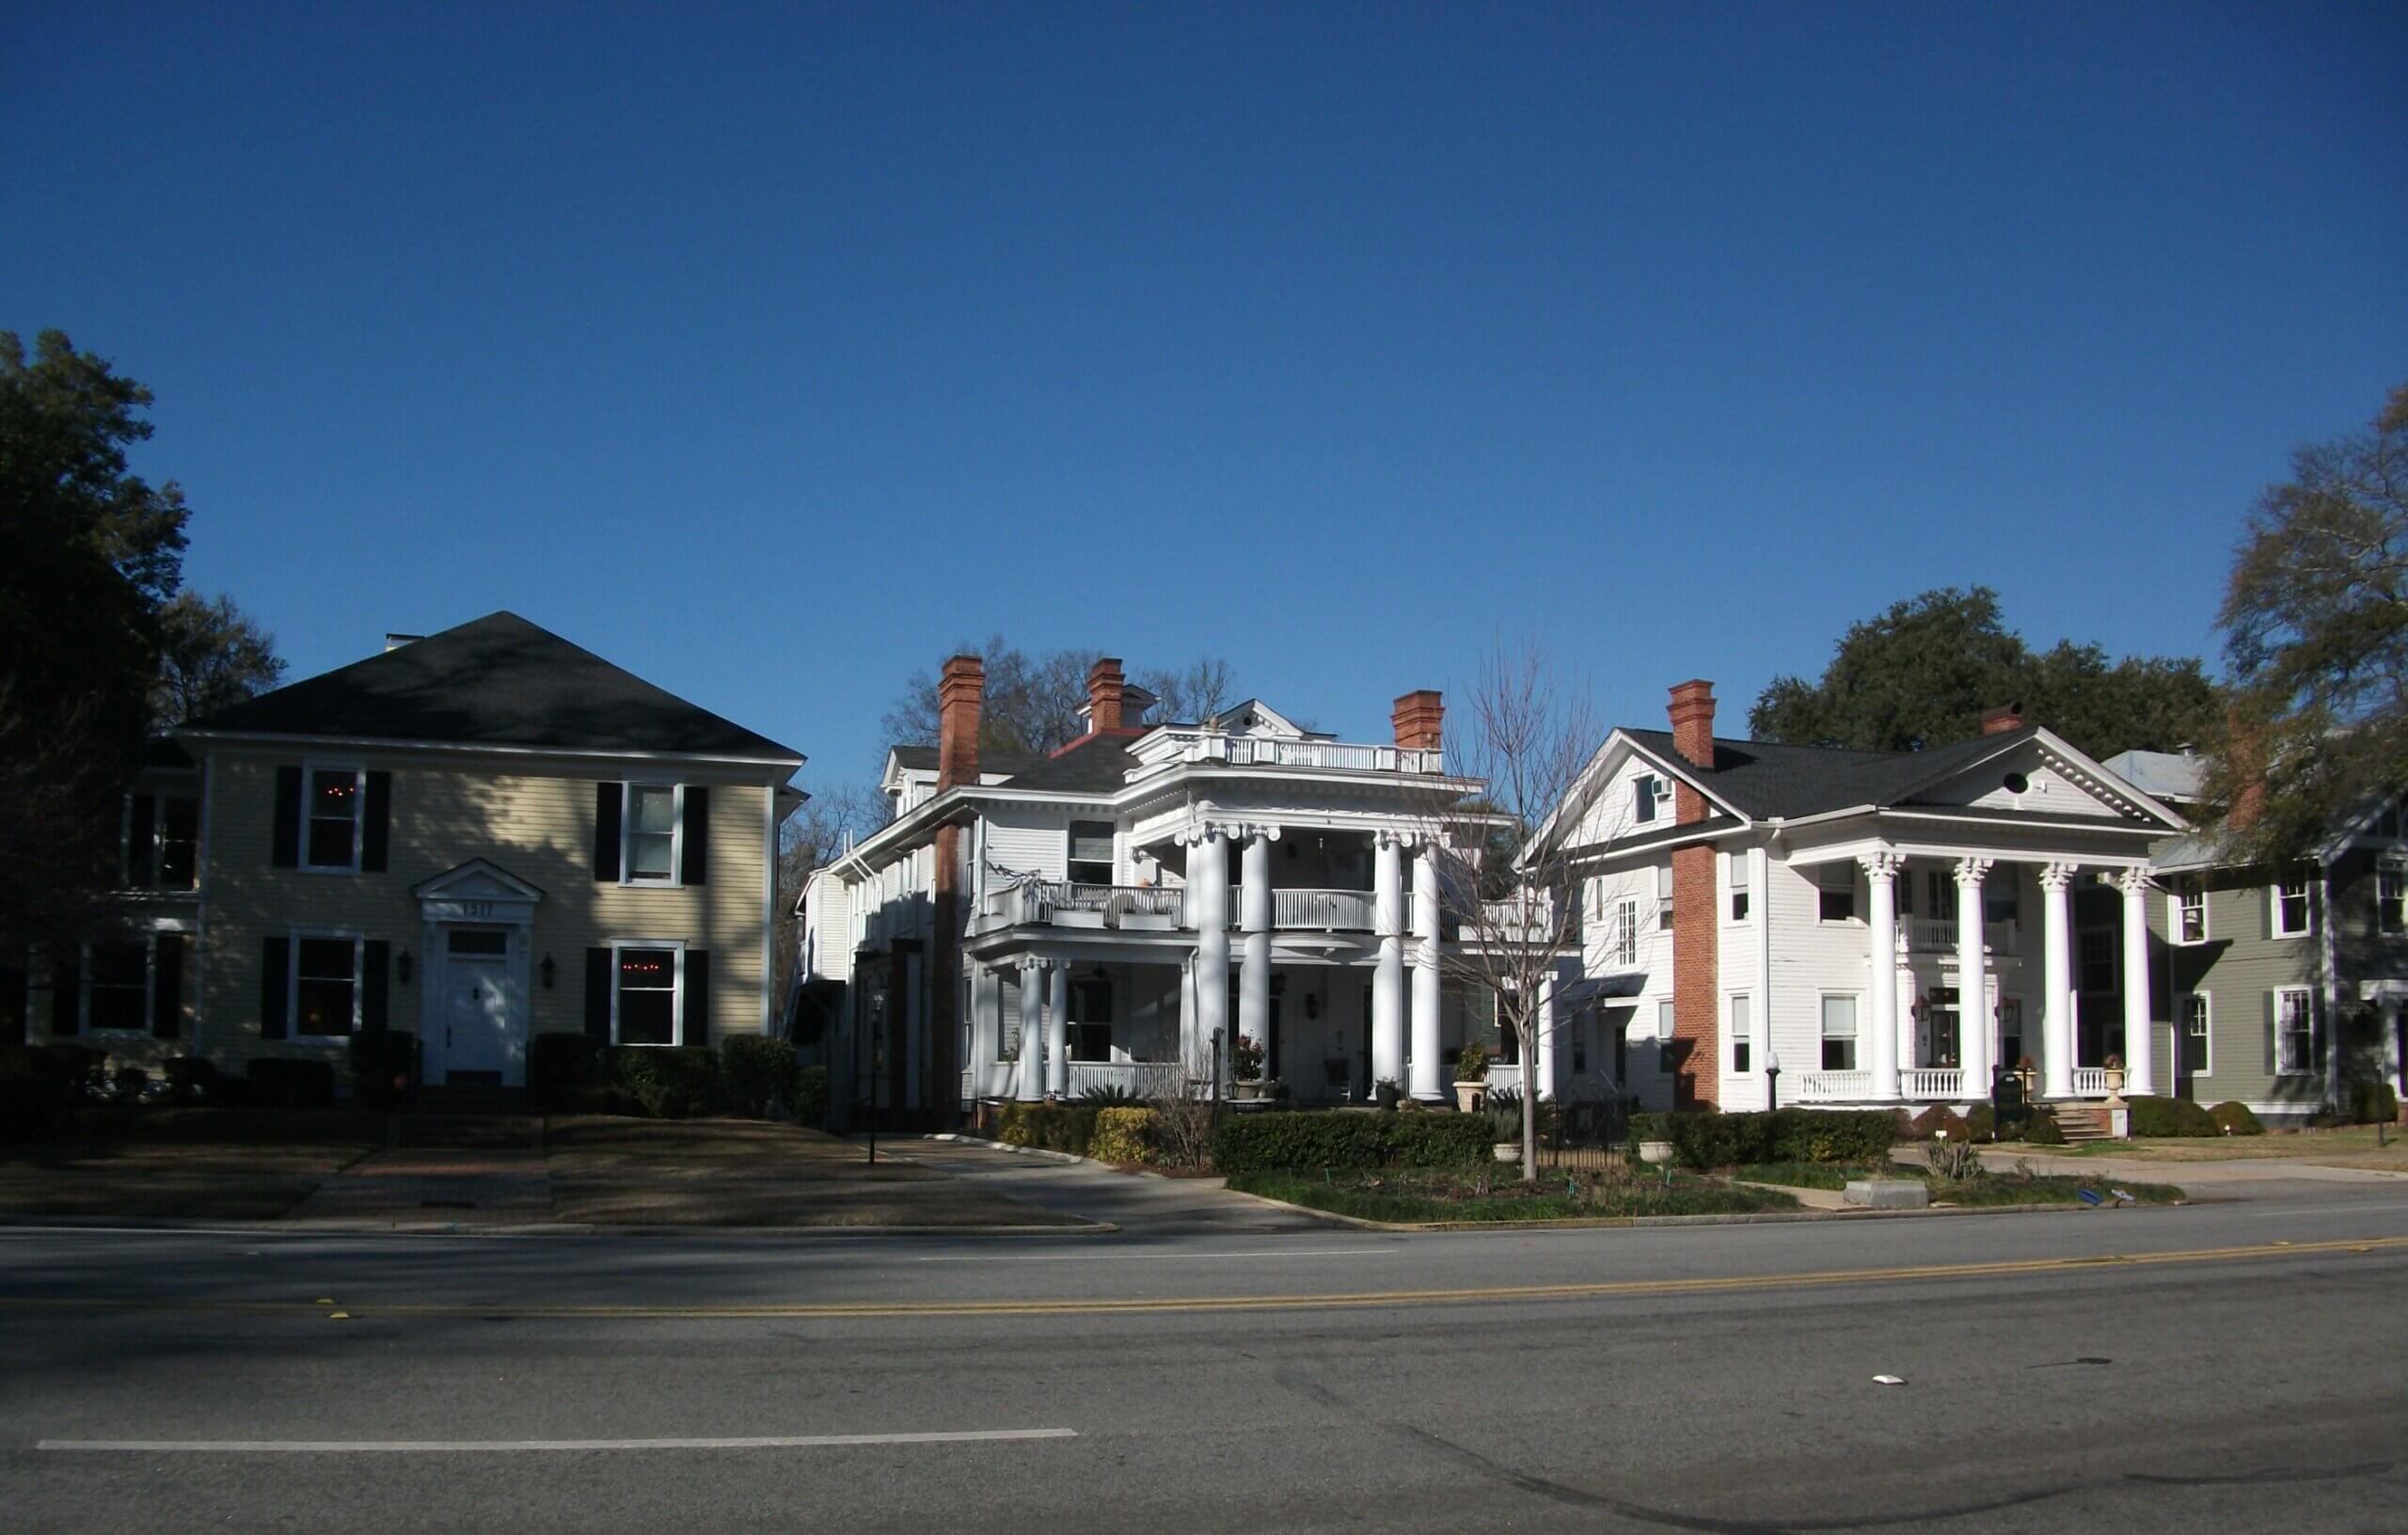 Photograph of a street with two story homes, two of which have large columns on the front facade